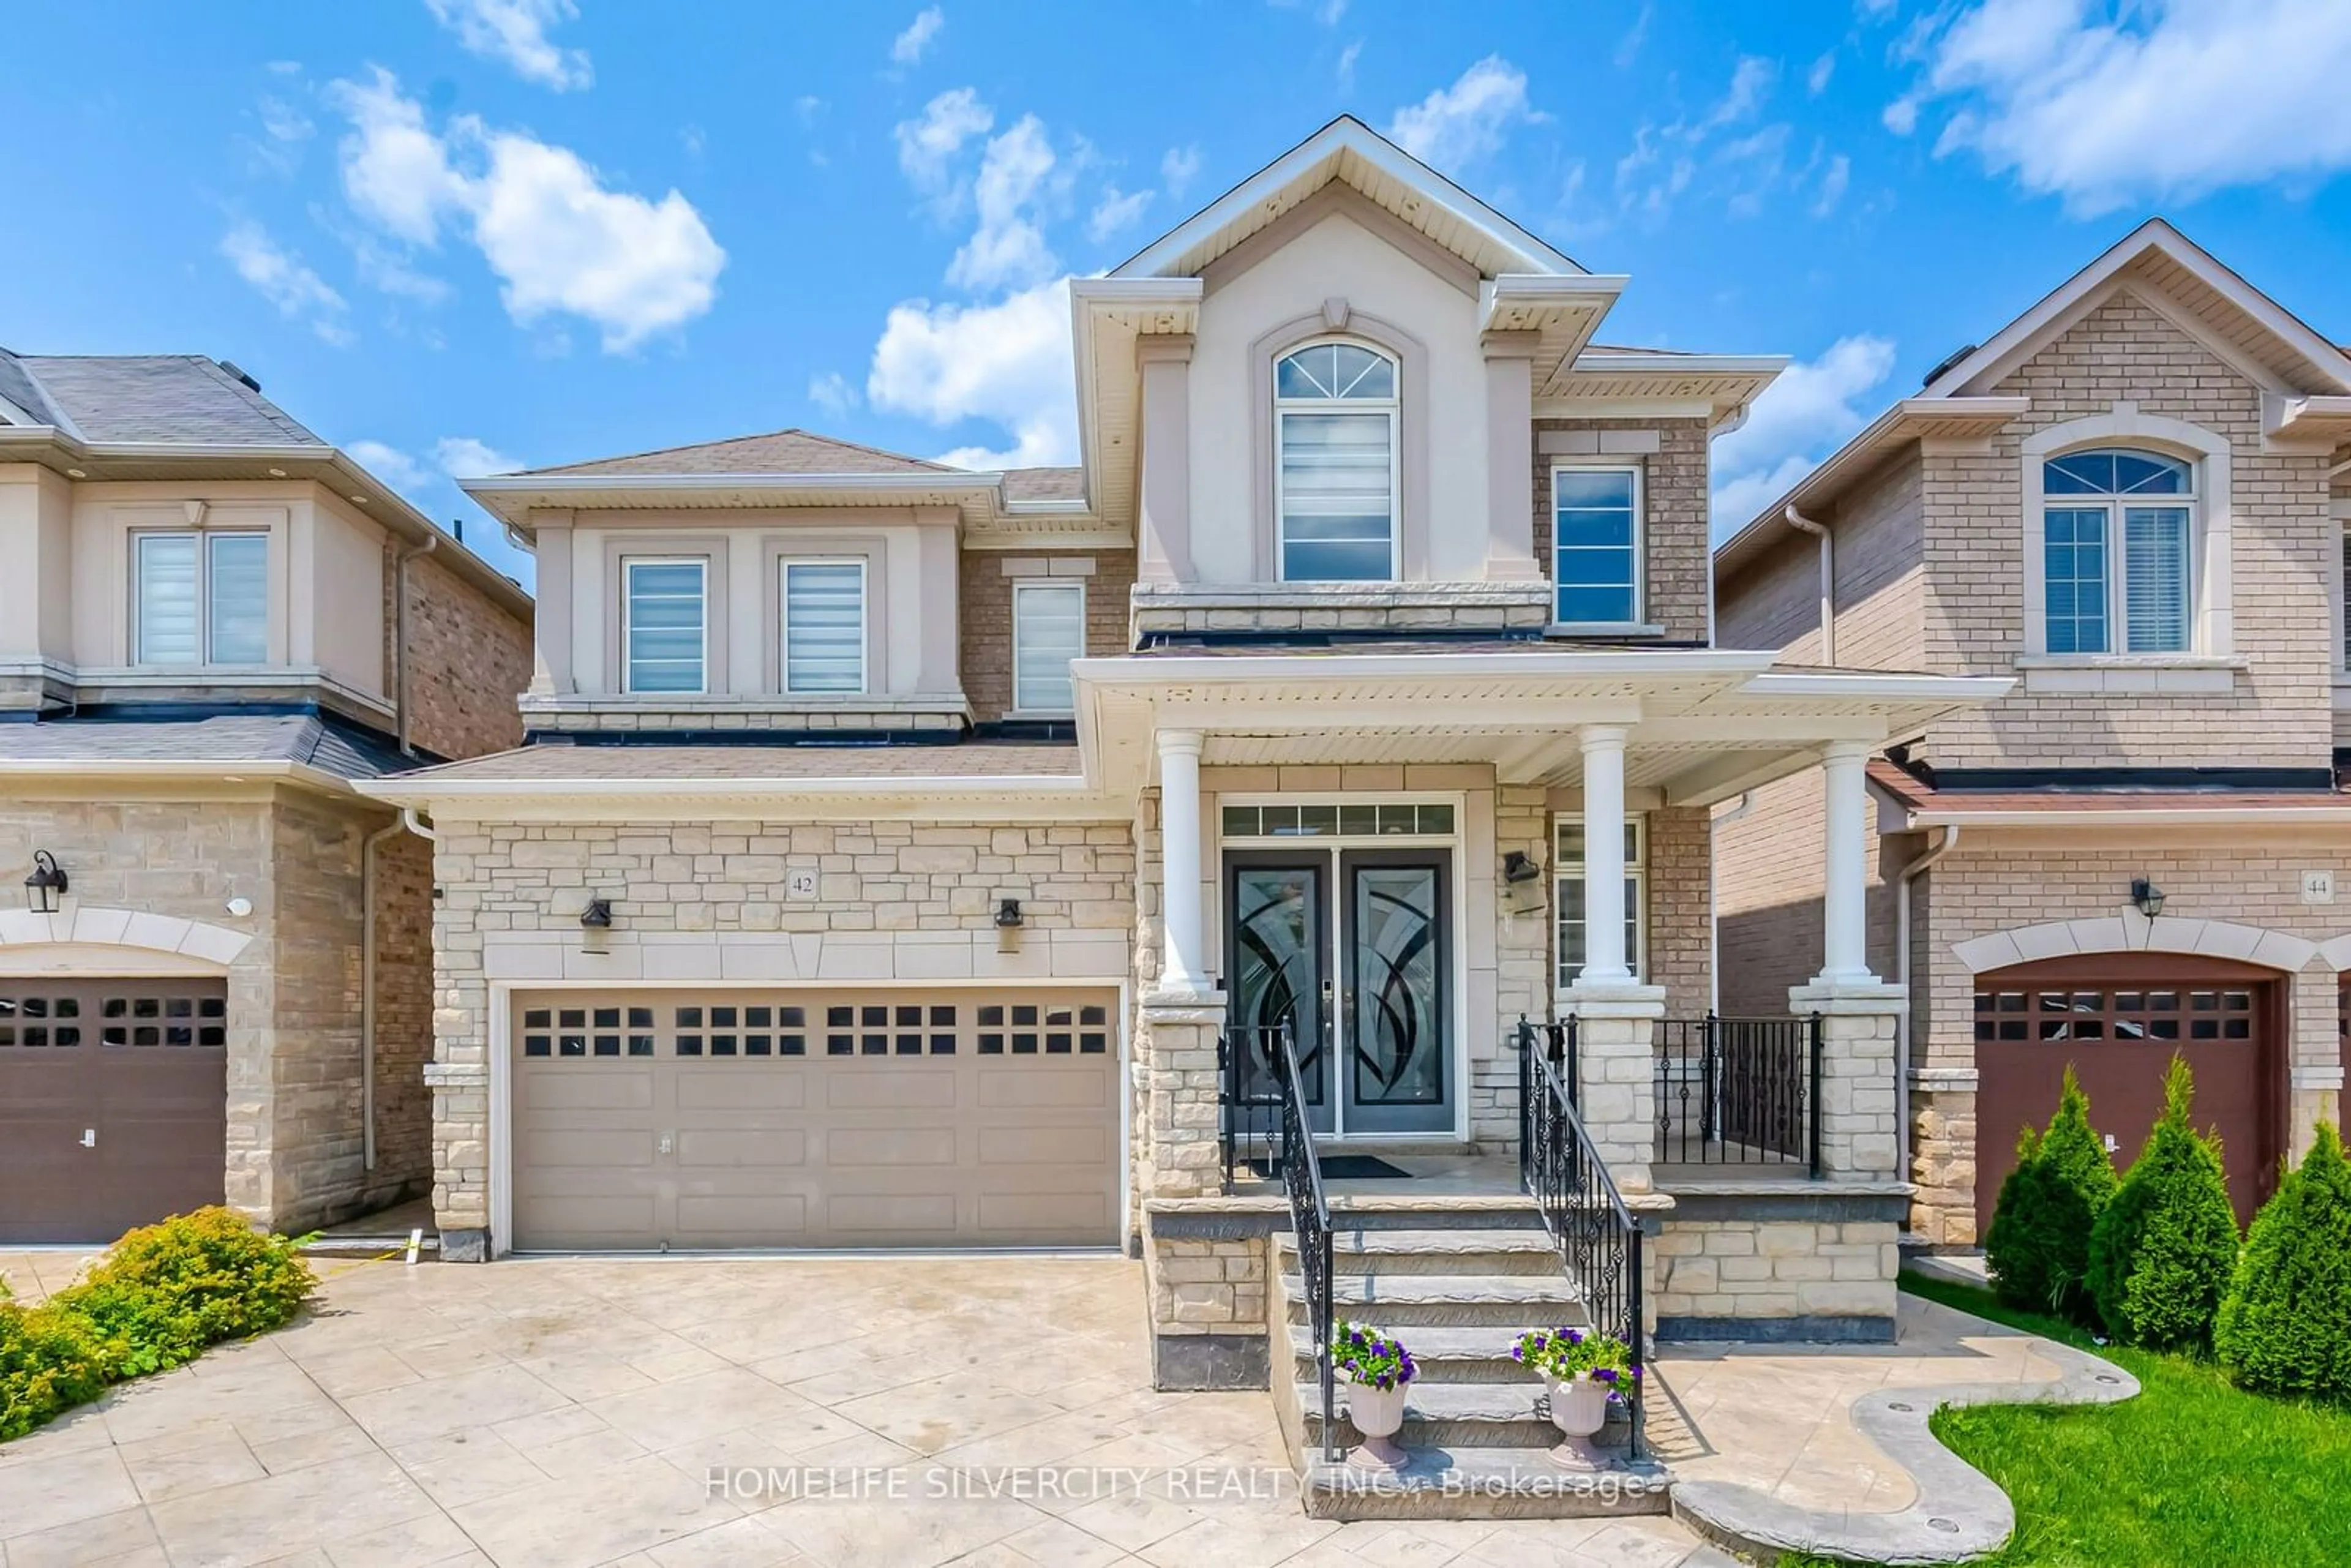 Home with brick exterior material for 42 Levendale Crt, Brampton Ontario L6P 3Y1